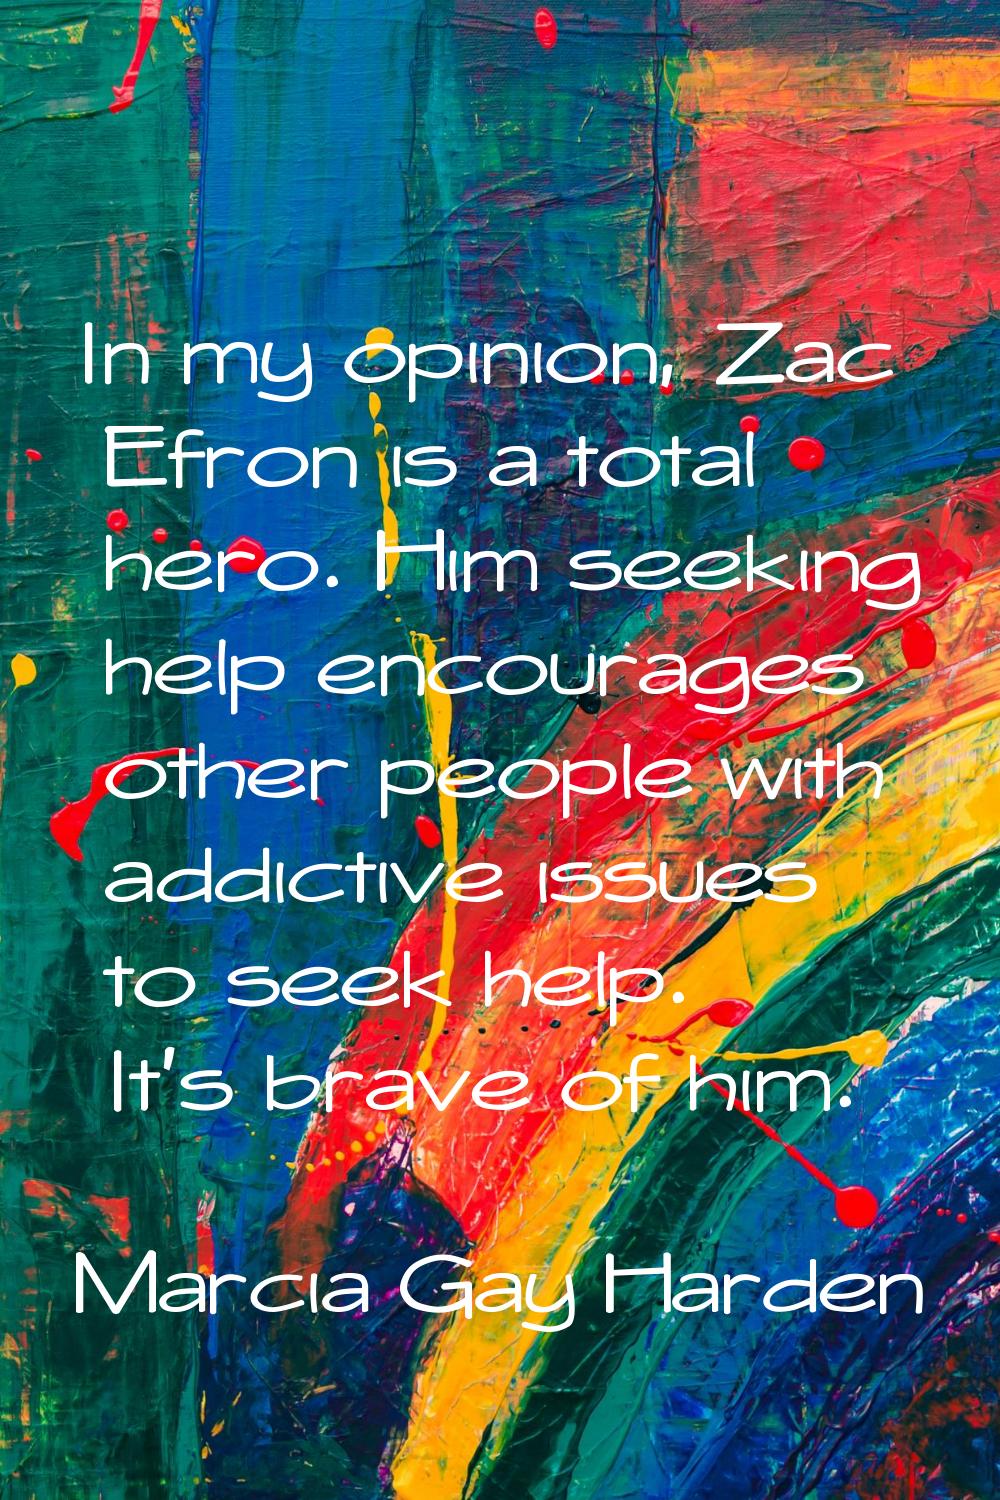 In my opinion, Zac Efron is a total hero. Him seeking help encourages other people with addictive i